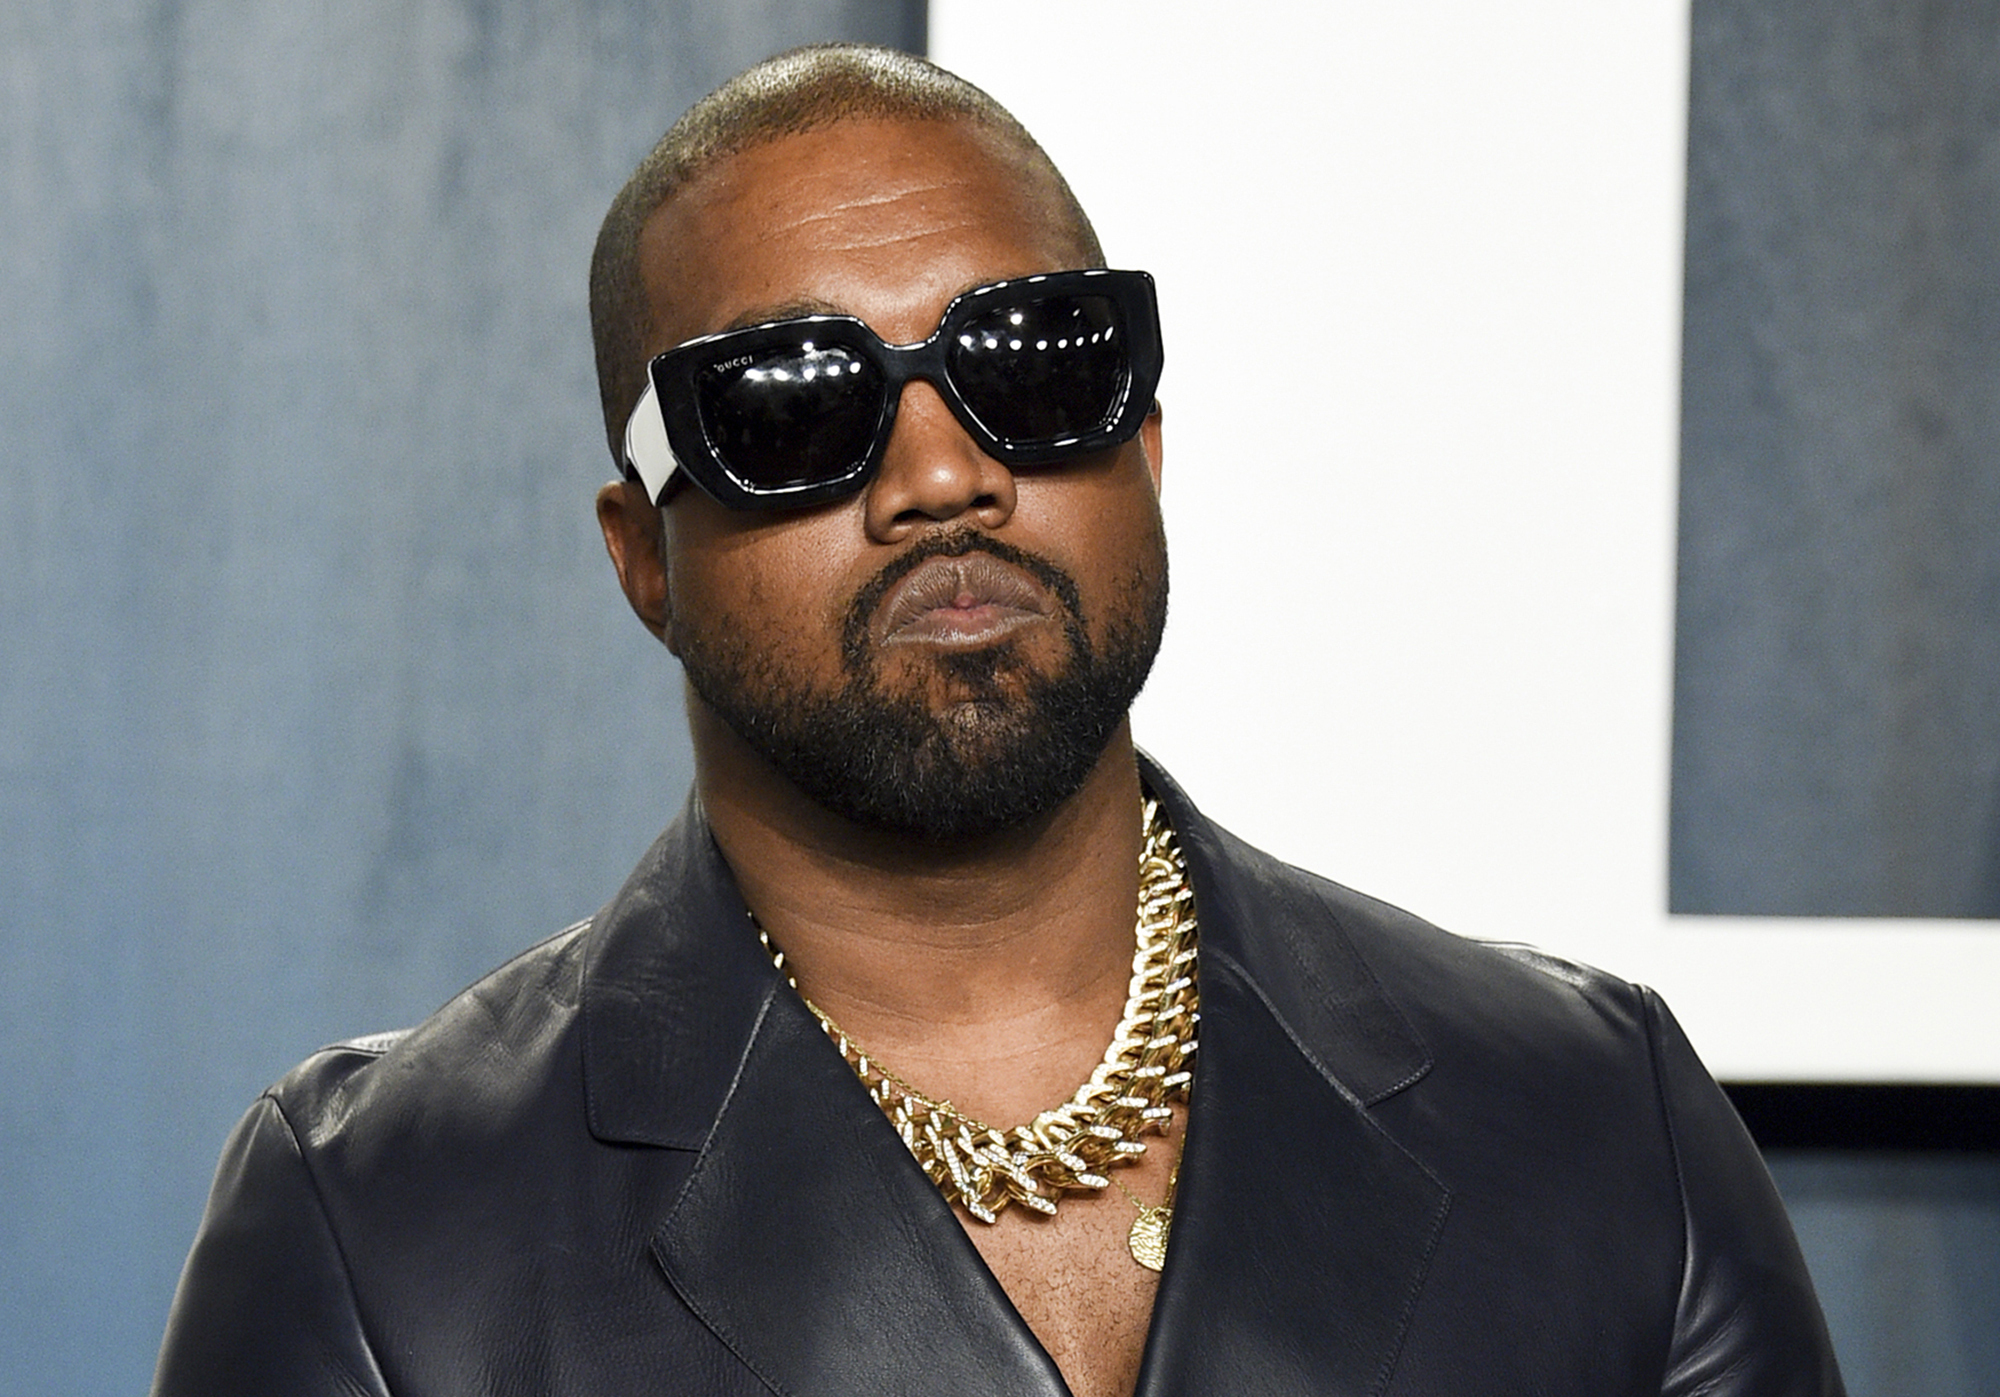 Kanye West says he'll go to 'death con 3 on JEWISH PEOPLE' after